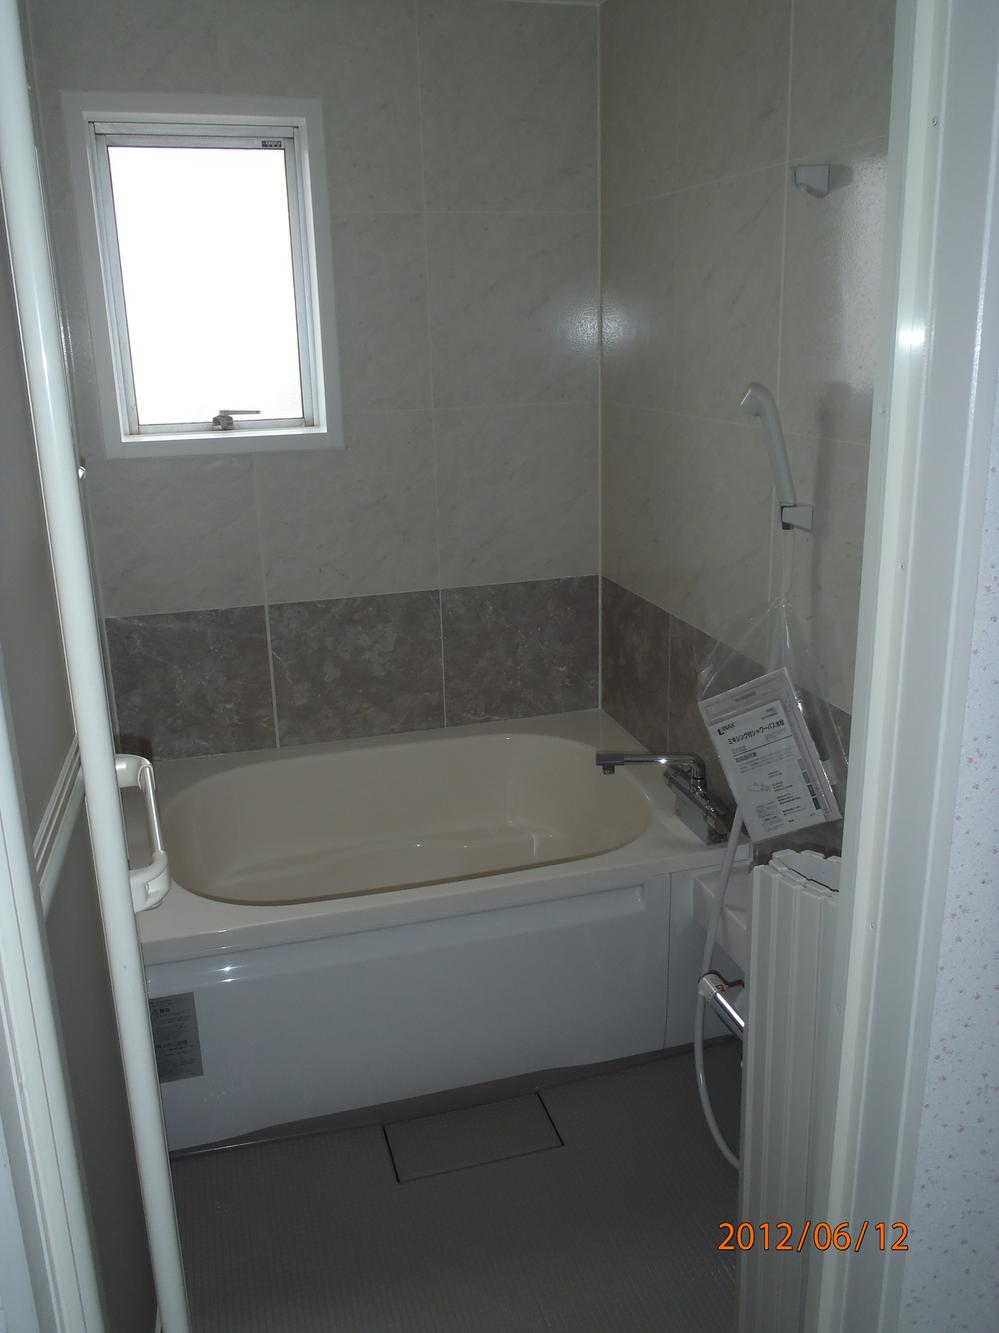 Bathroom. (After renovation) same specification. Property is present condition delivery. 